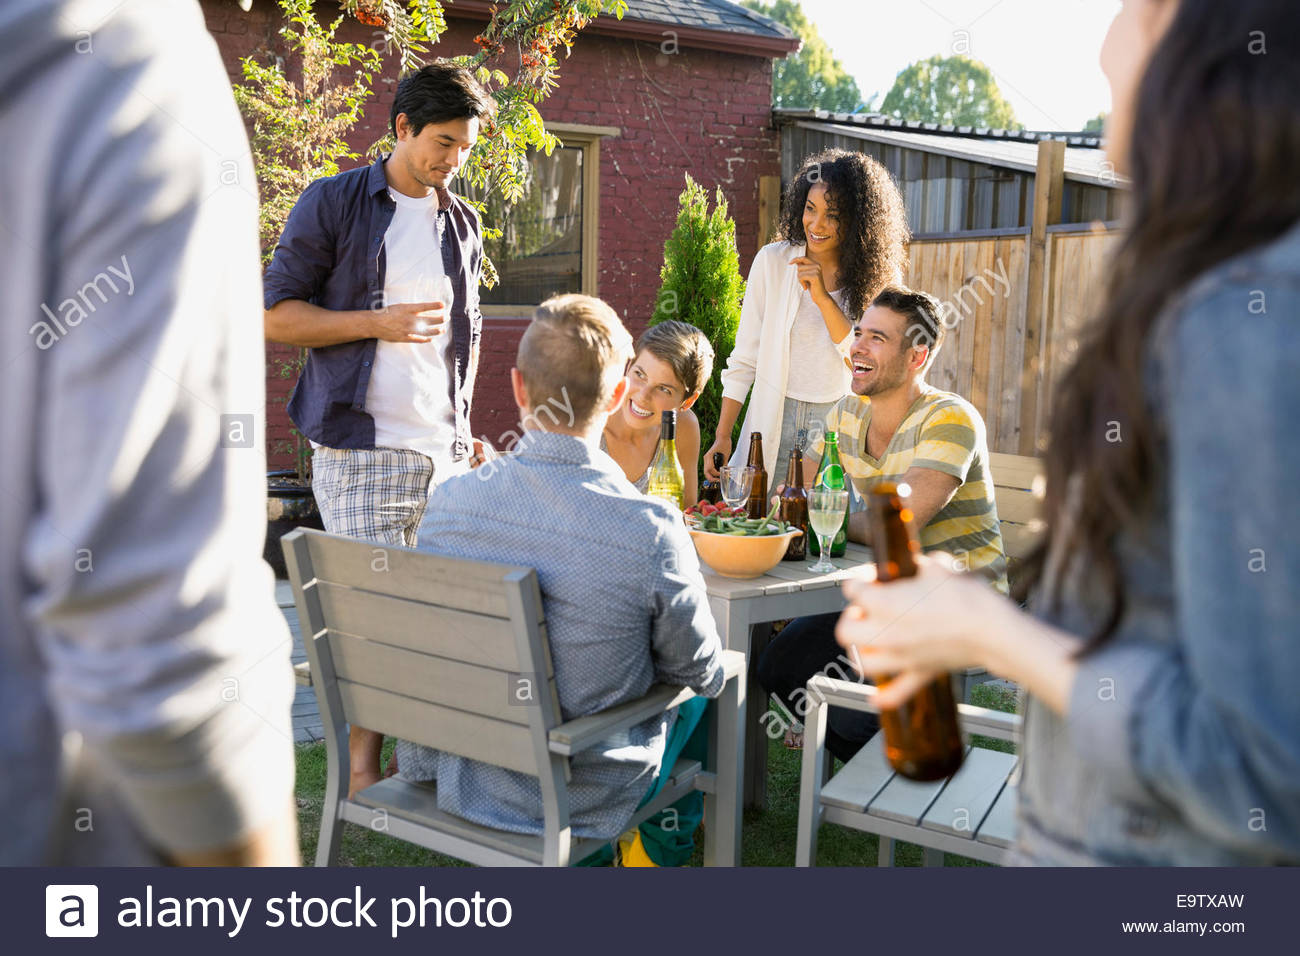 Friends eating and drinking at backyard barbecue Stock Photo